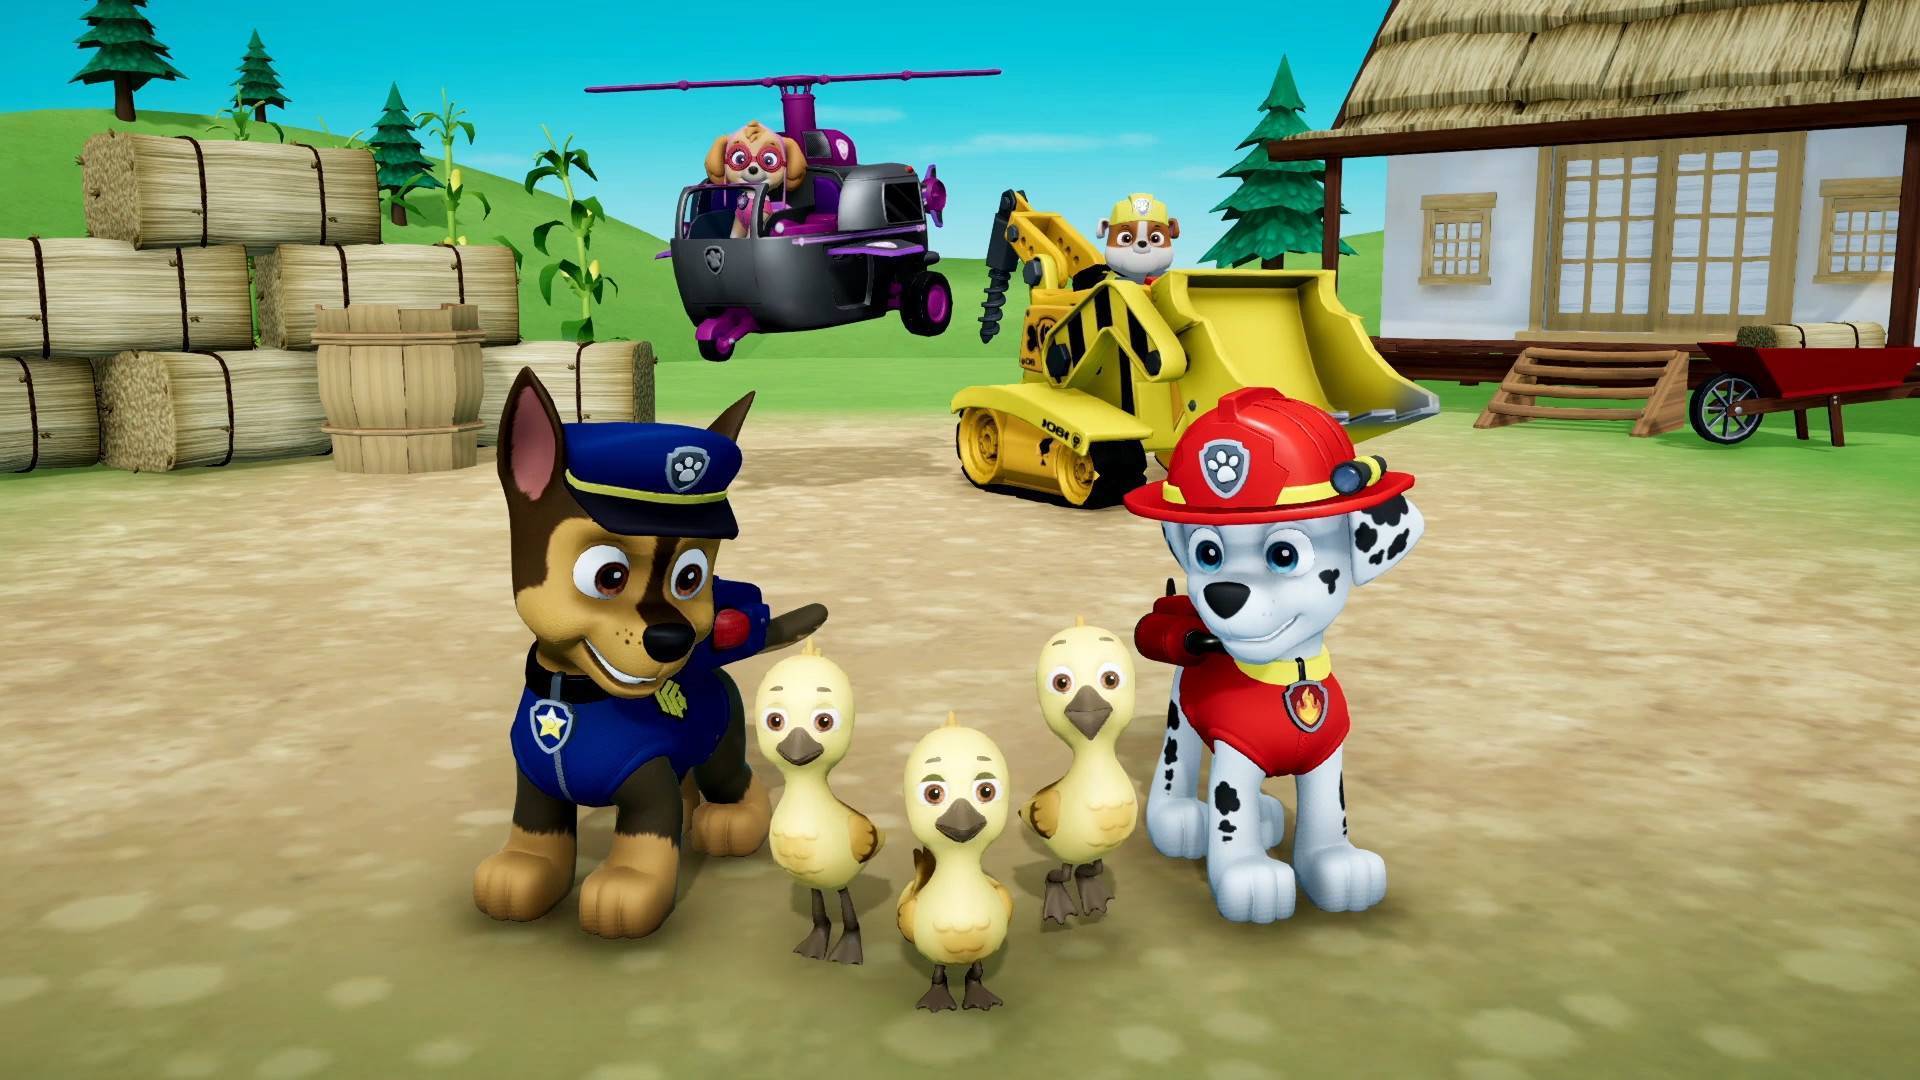 Paw Patrol On A Roll - Price of $14.67